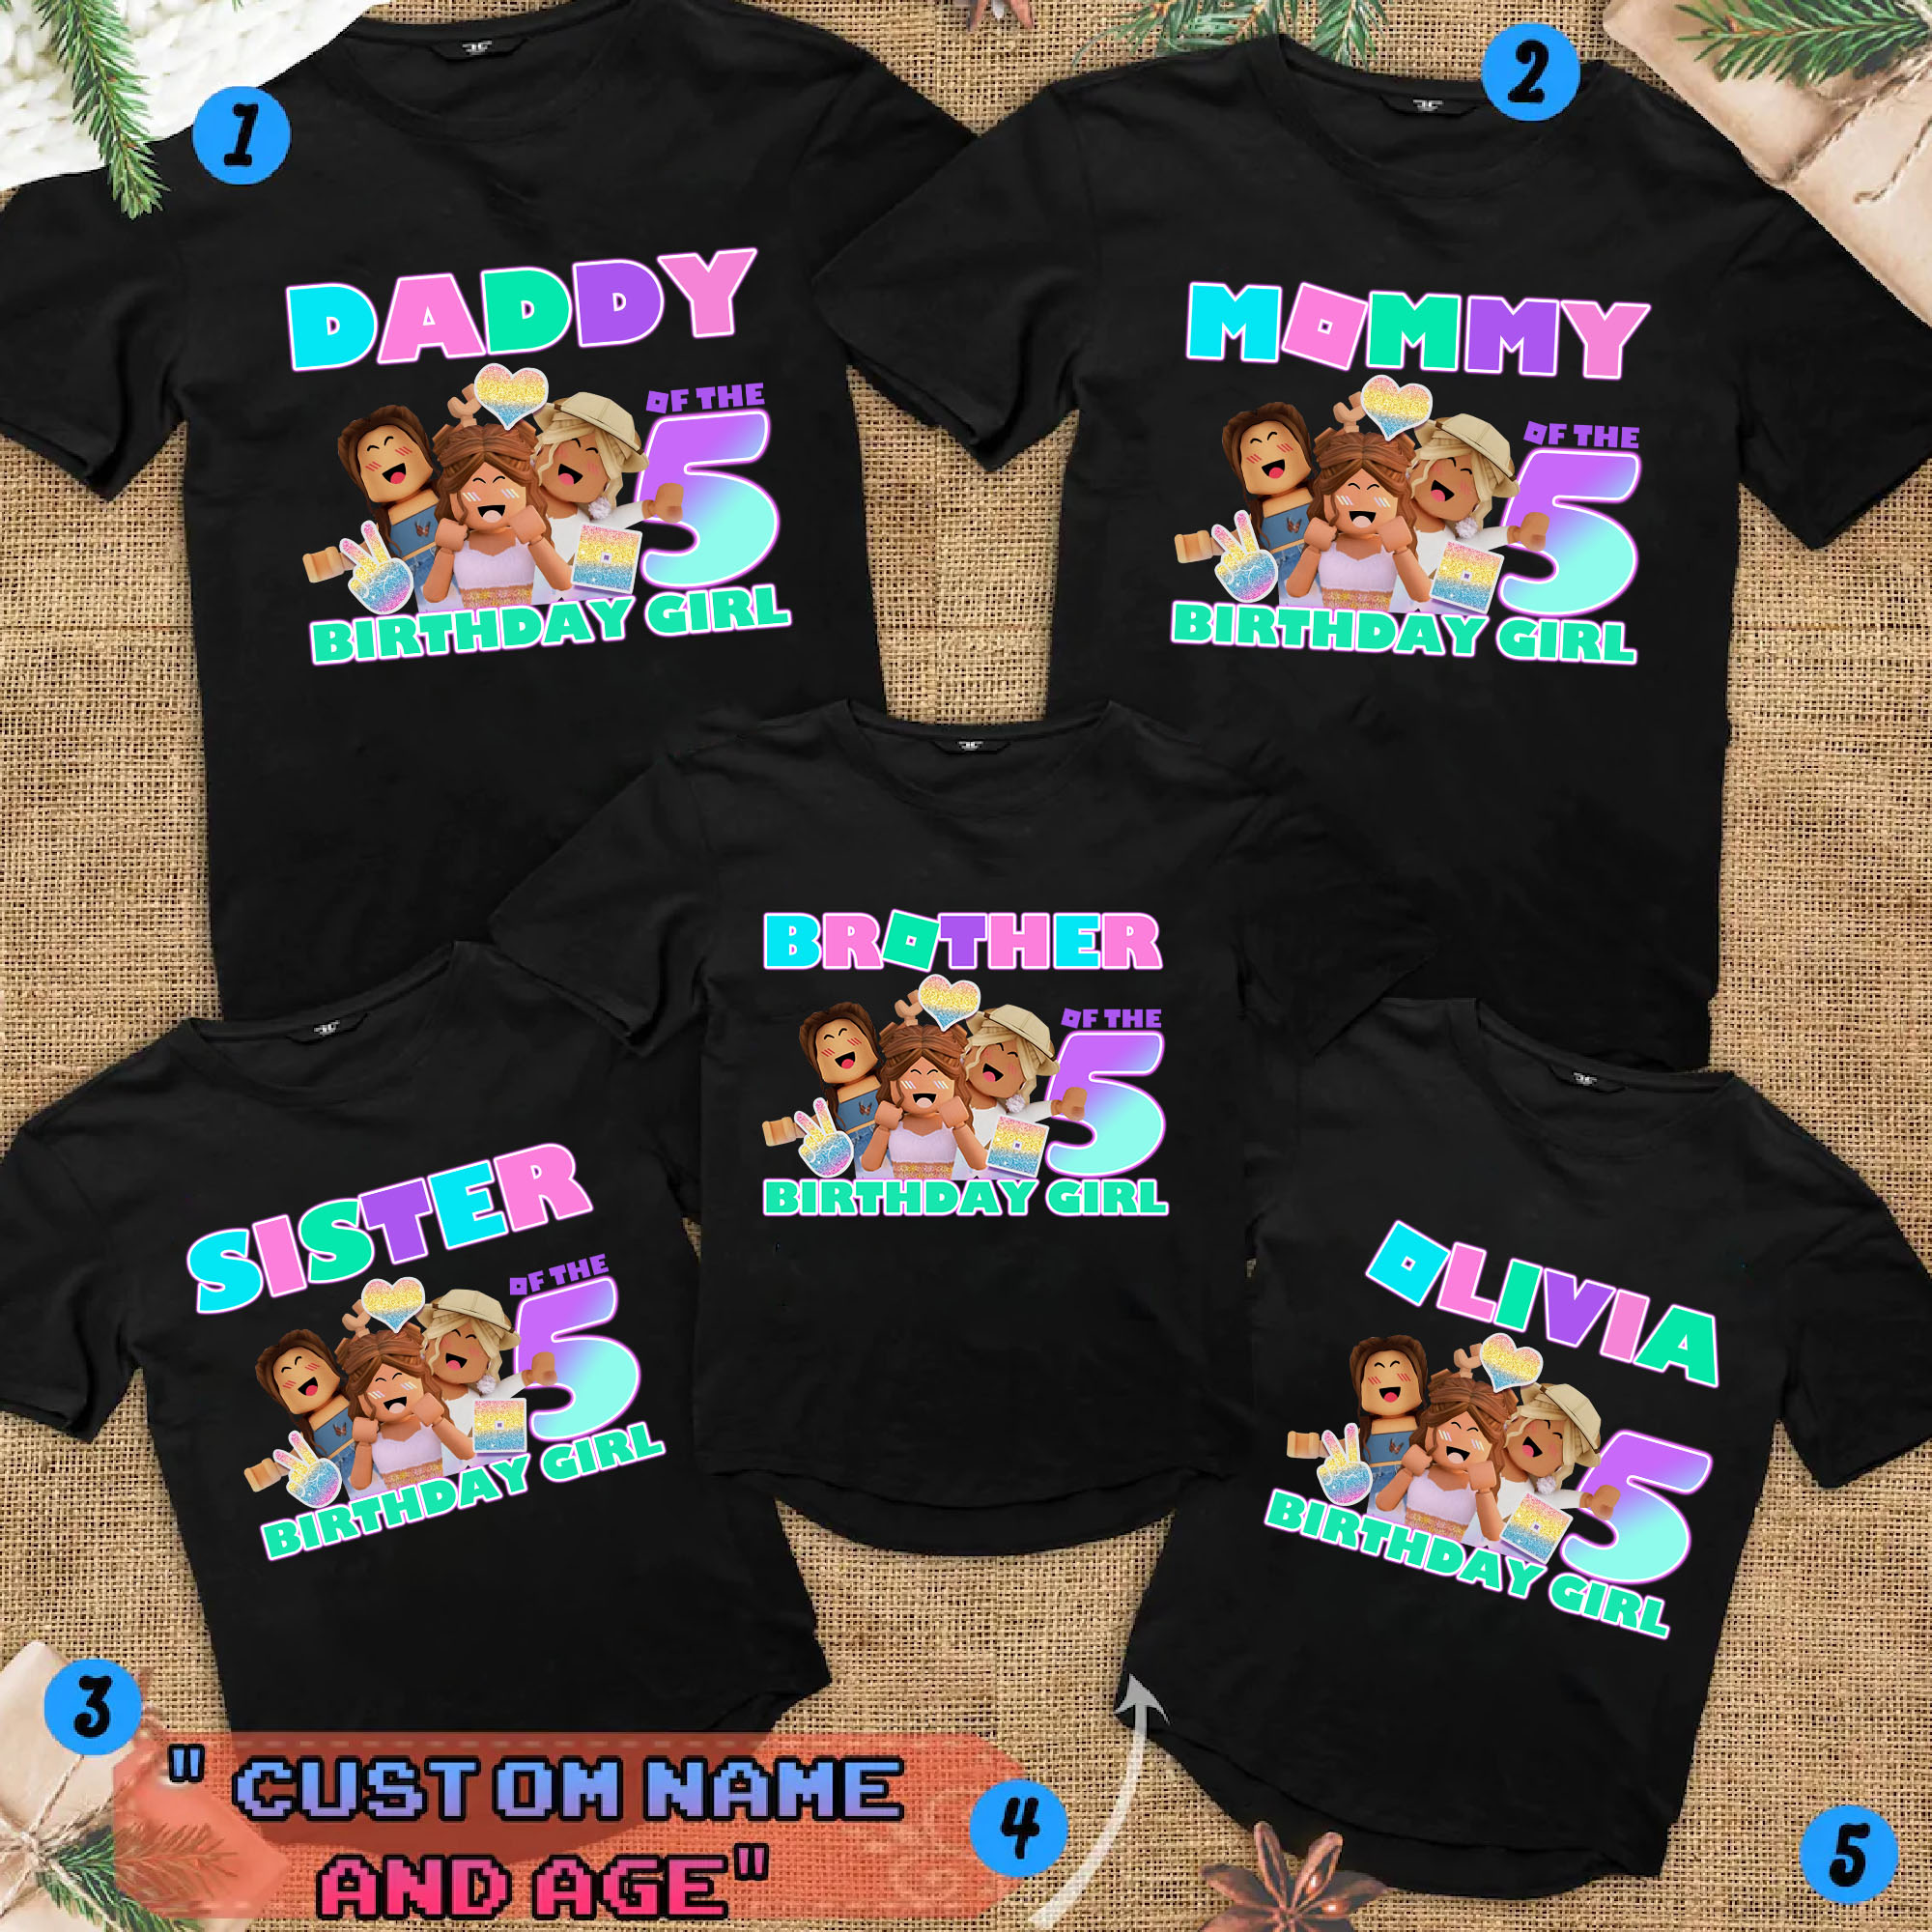 Roblox Birthday Party Shirt, Roblox Girls Shirt, Roblox Family Shirt, Girls Roblox Party,  ersonalized With Name And Age